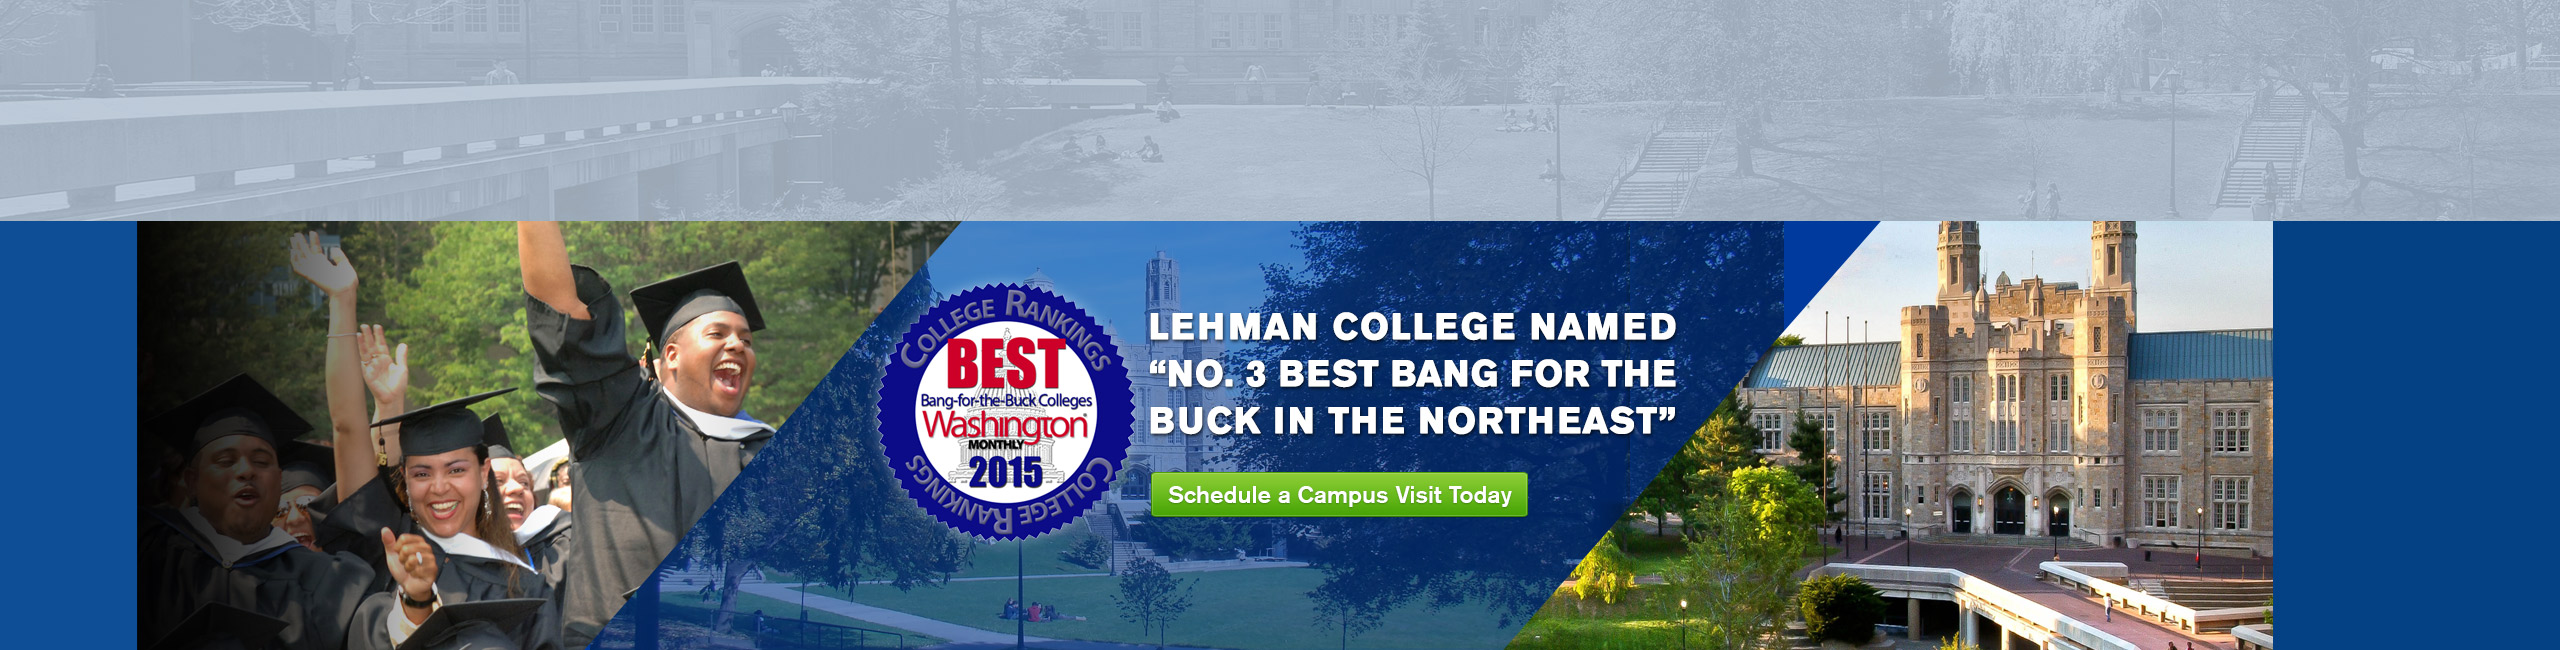 Lehman College Honored: #3 Best Bang for the Buck in the Northeast